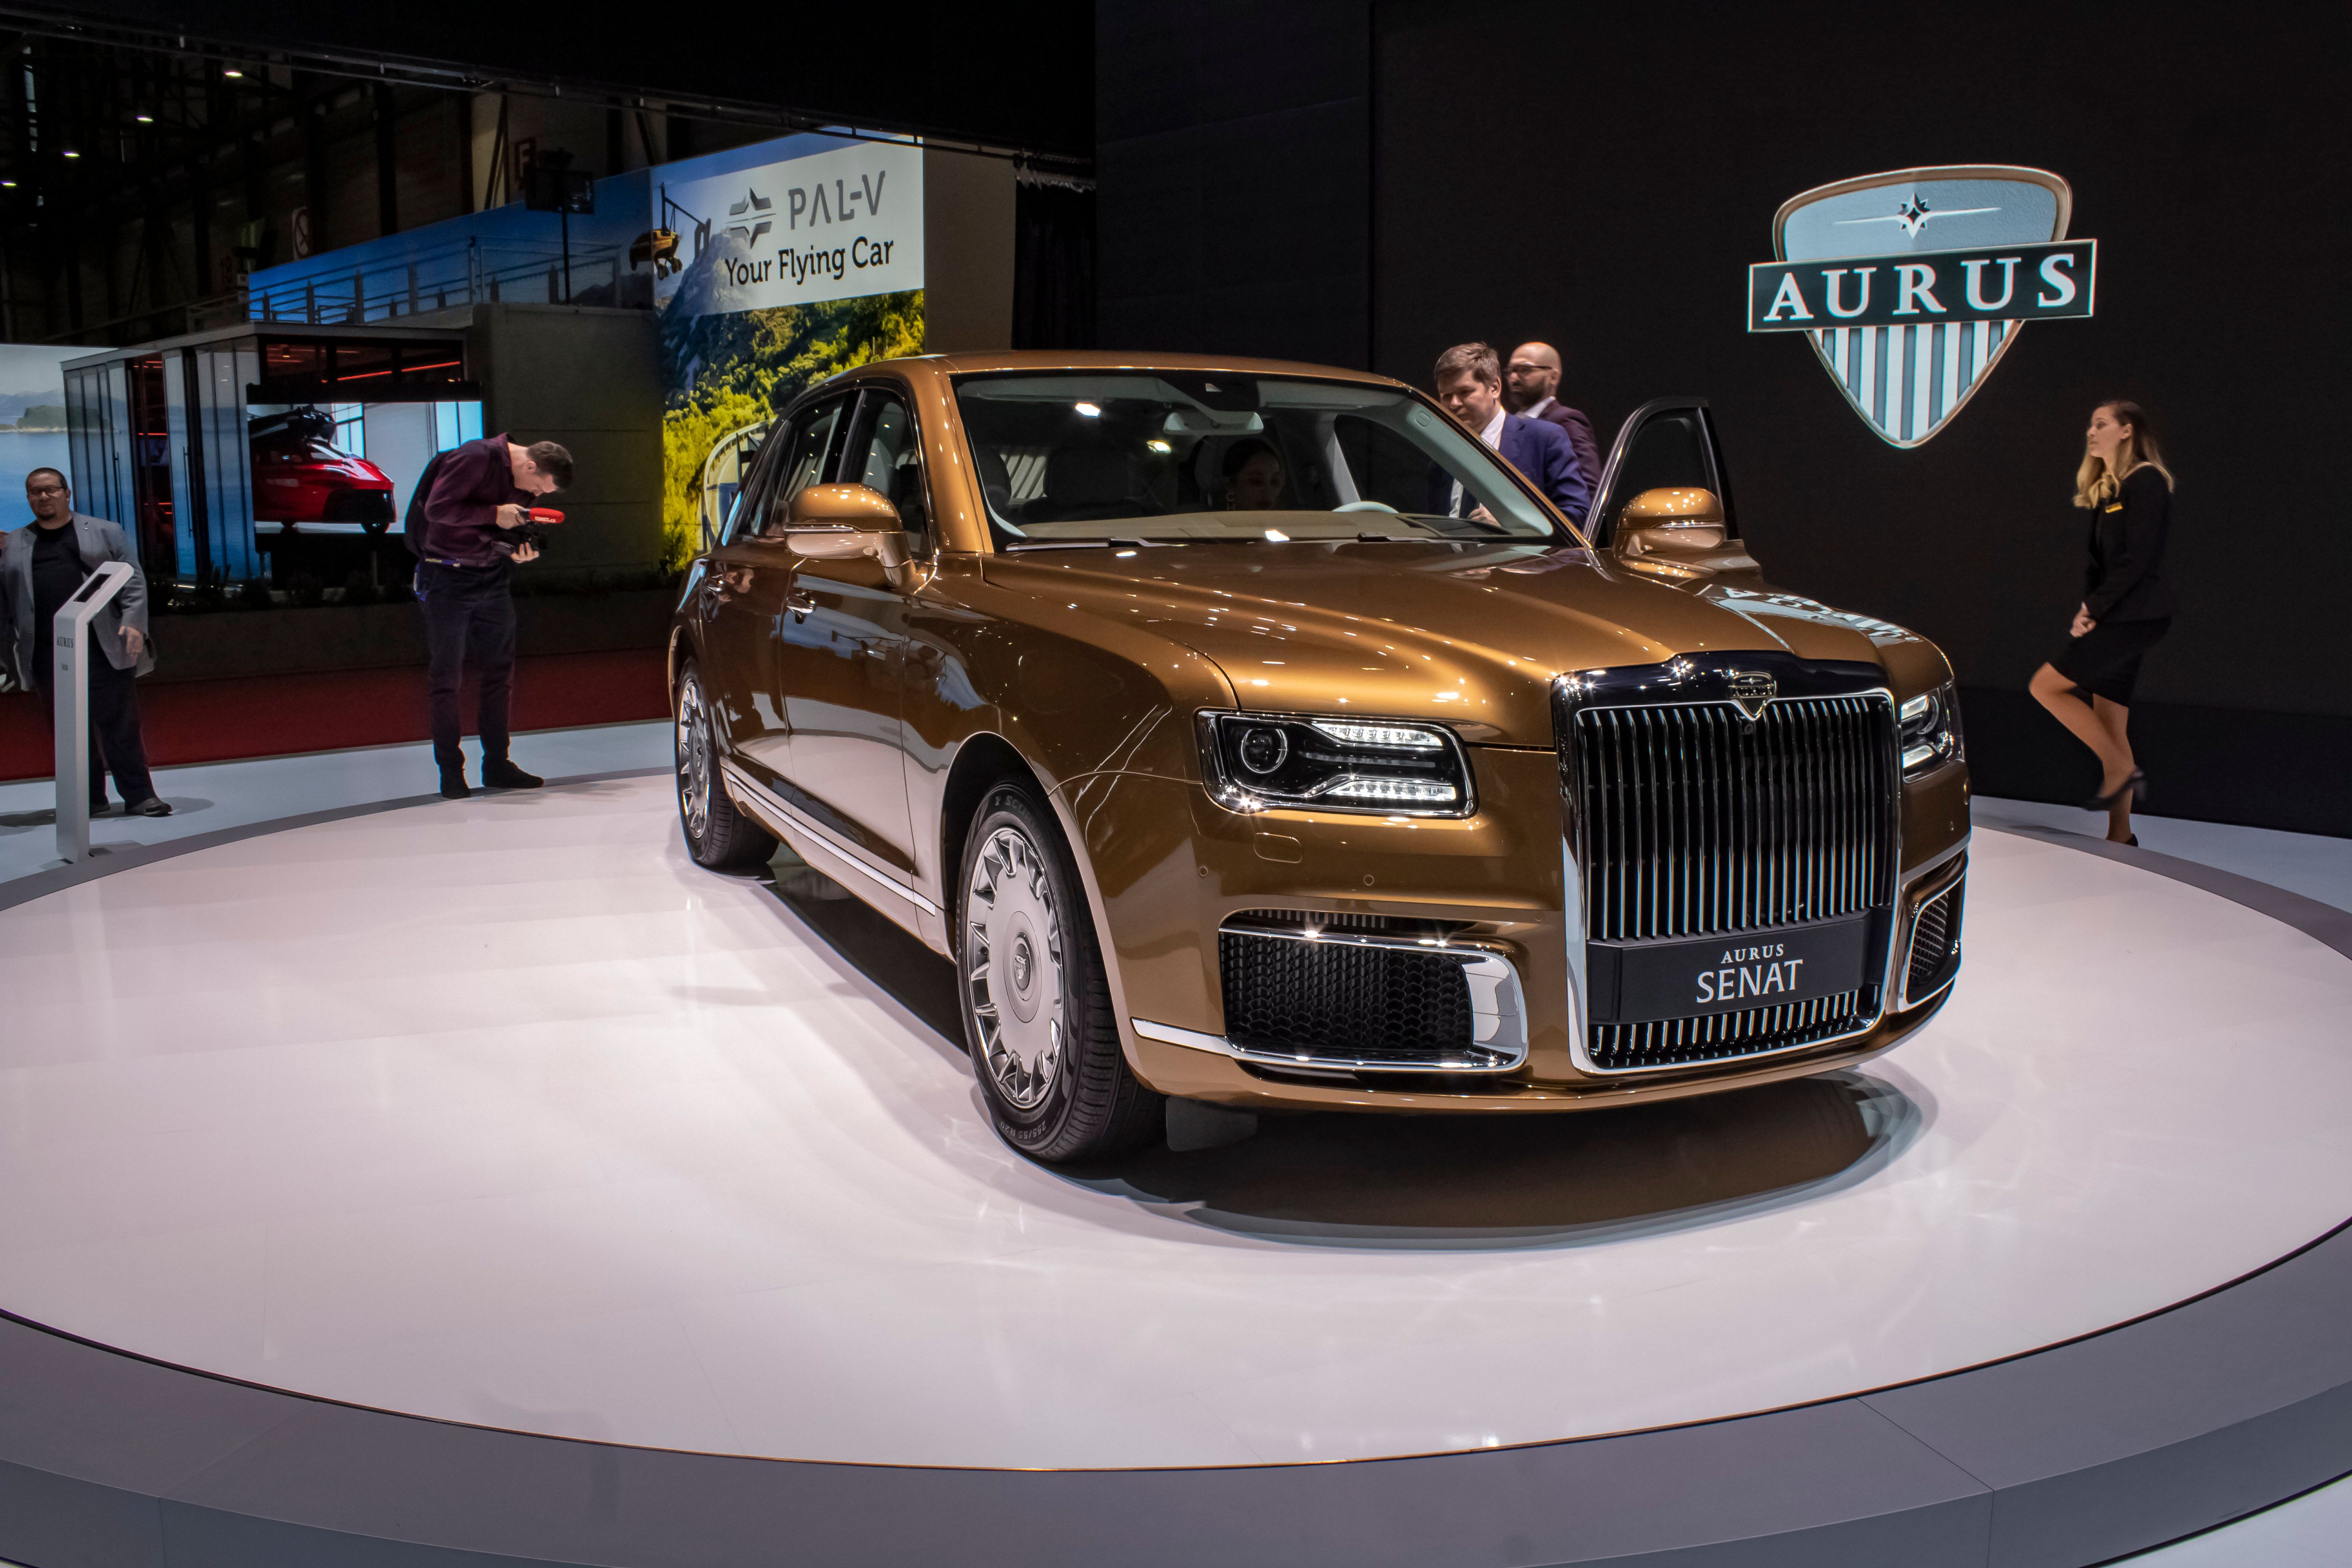 Aurus Sénat.  The utmost luxury car, made to compete with Rolls